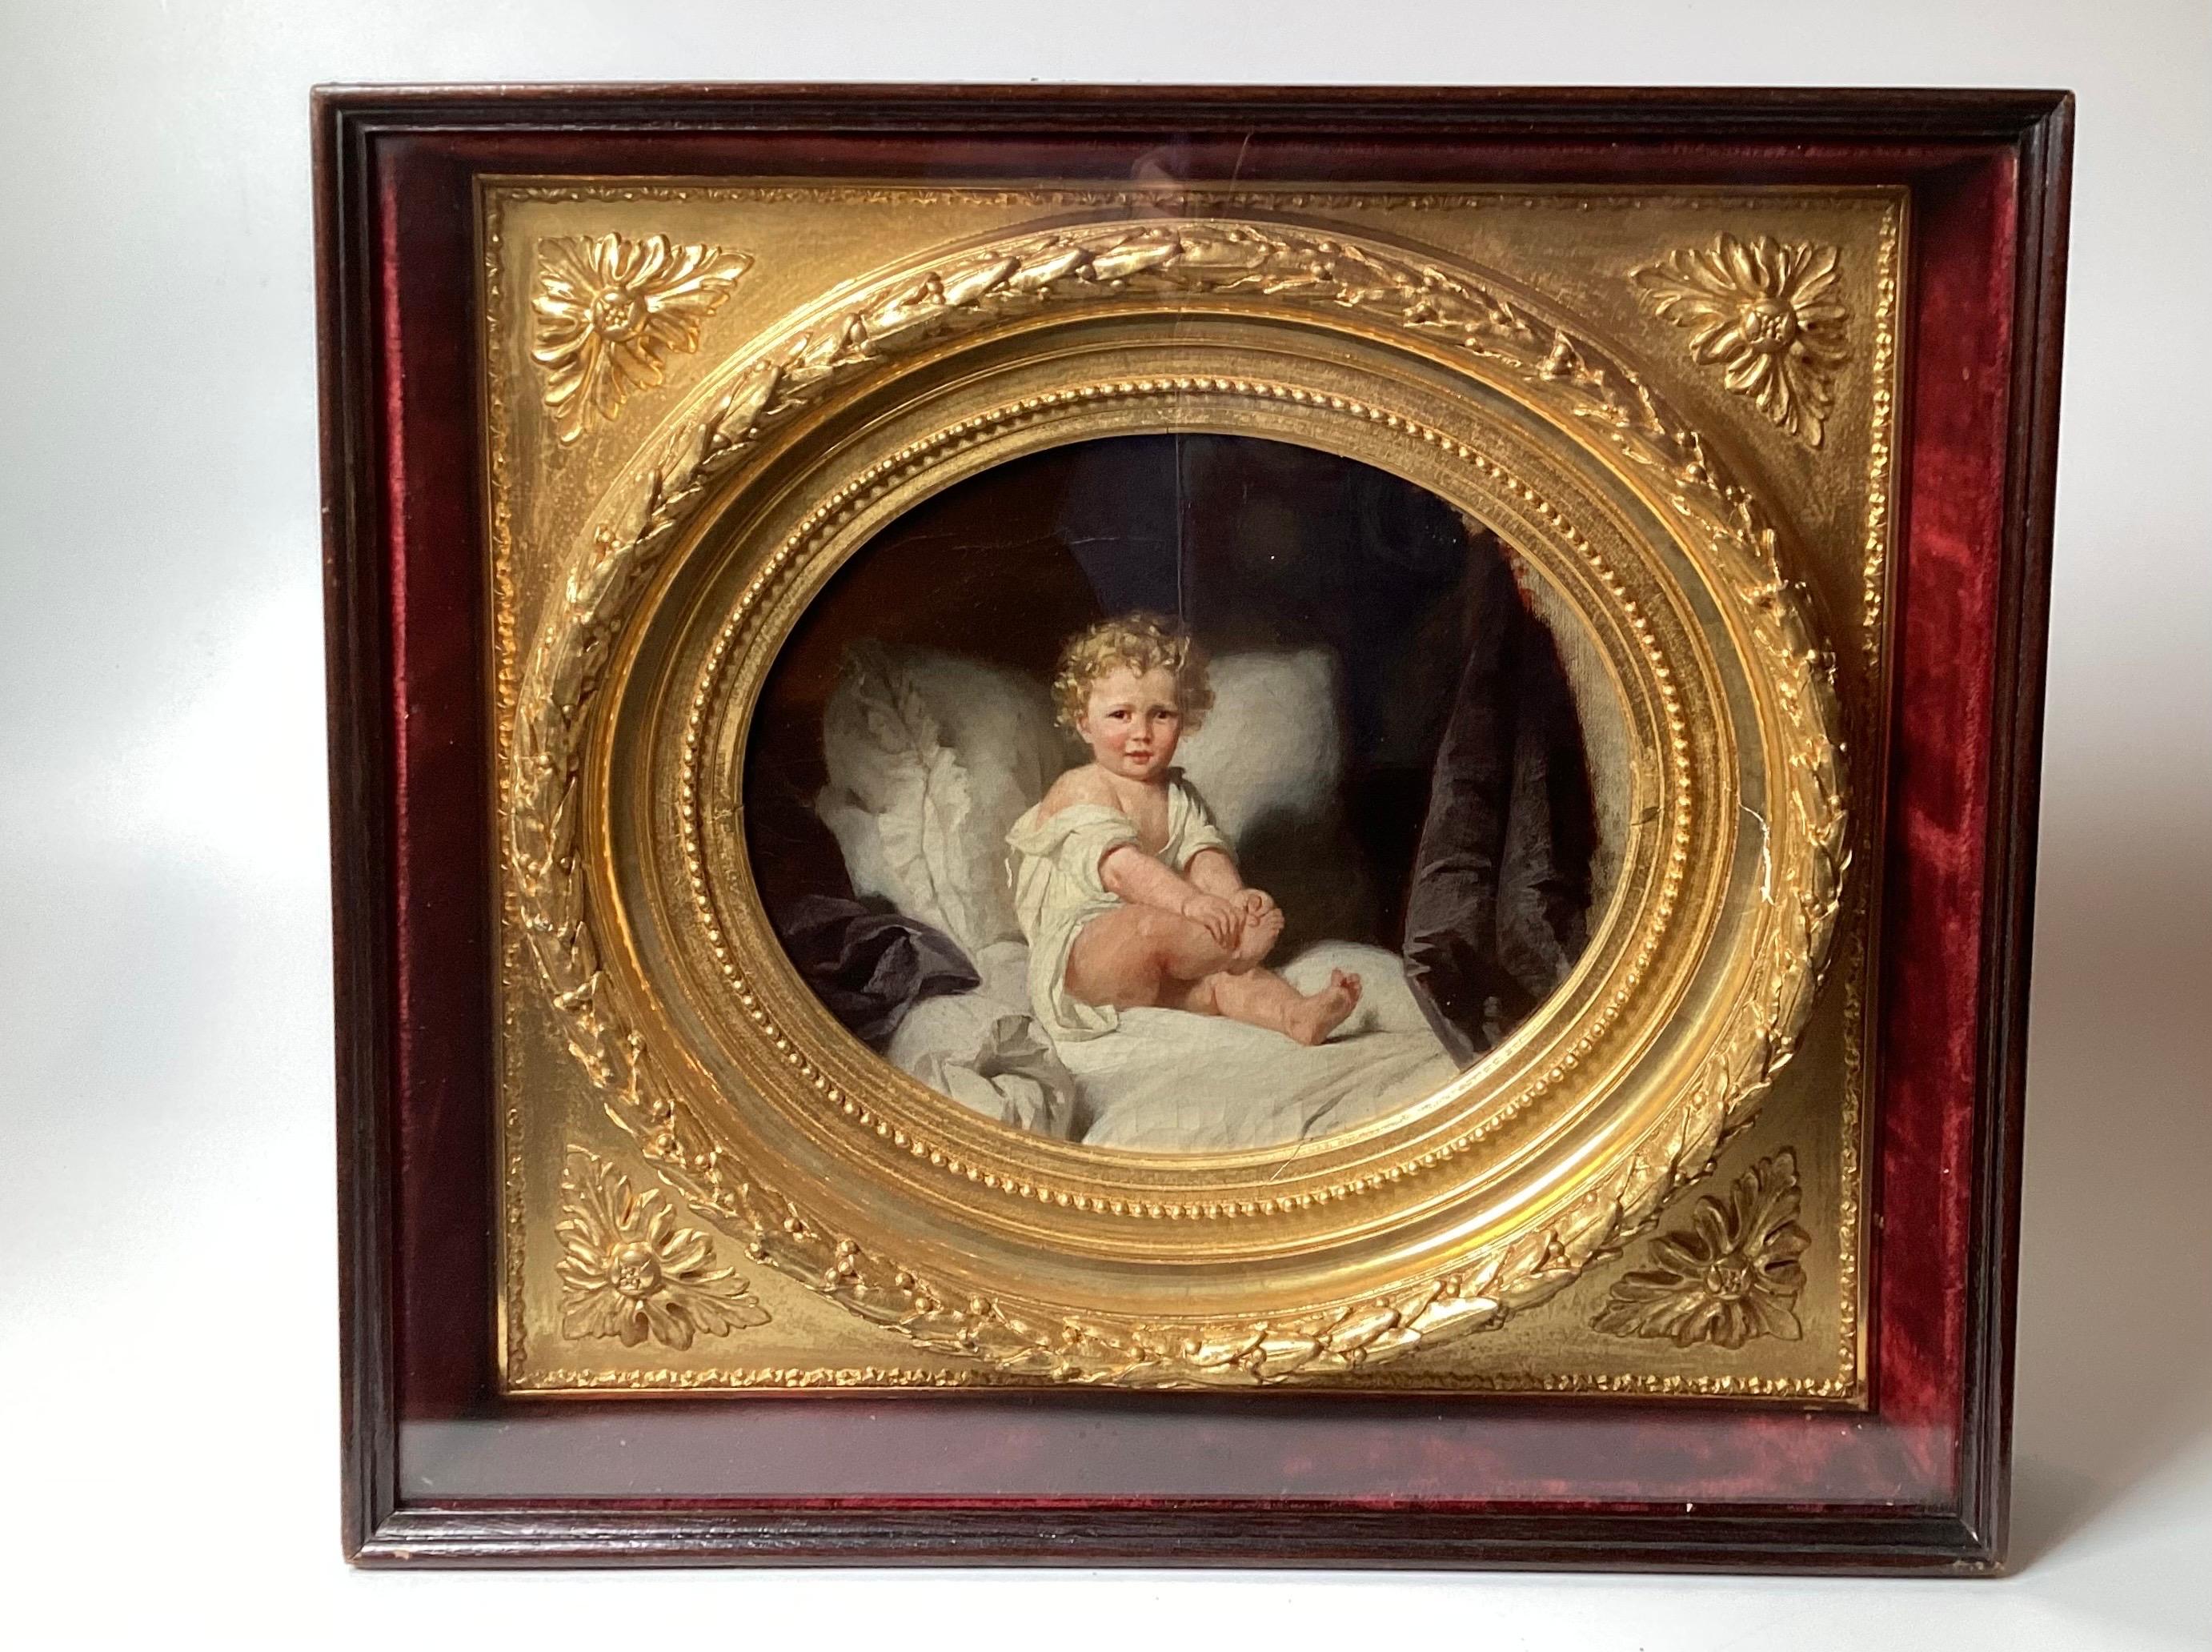 A beautiful portrait of a young boy exquisitely painted oil on canvas, German, attributed to artist August Sohn (1830-1889).  The height quality gilt wood frame in shadow box museum style frame under glass.  The boy with golden curly locks, sitting